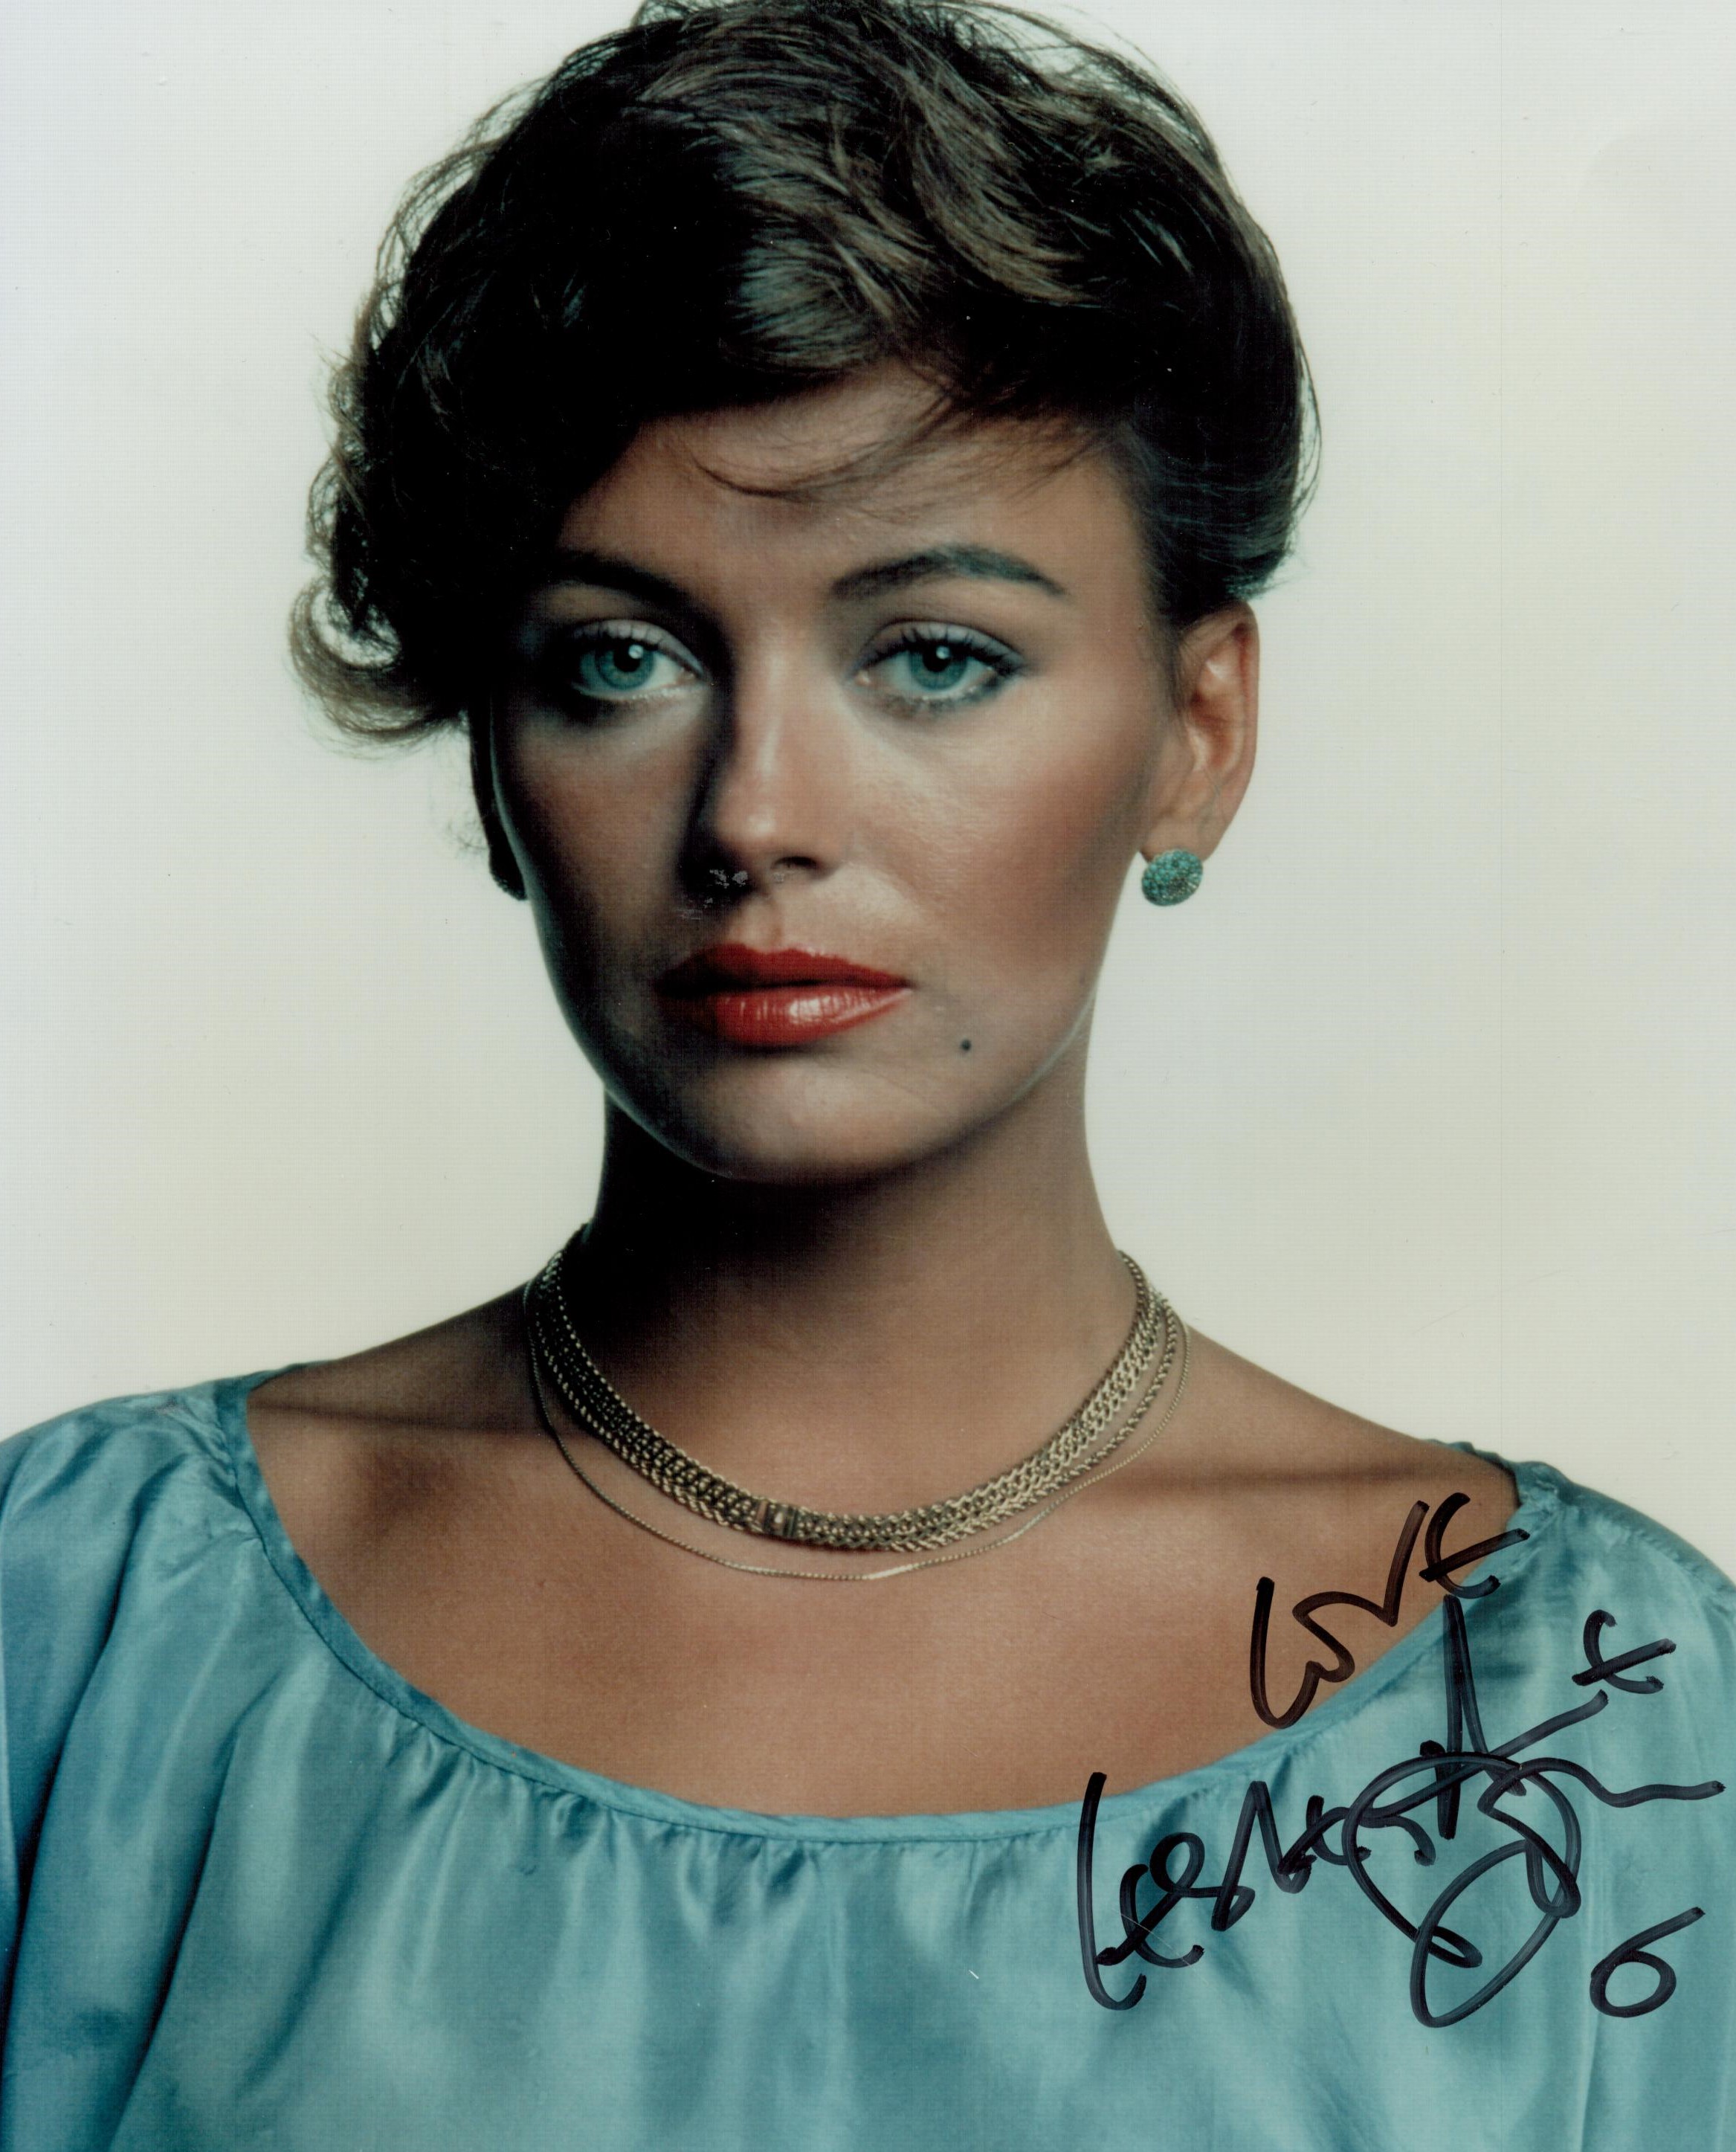 Leslie-Anne Down signed 10x8 colour photo. Down is a British actress, singer and former model. She